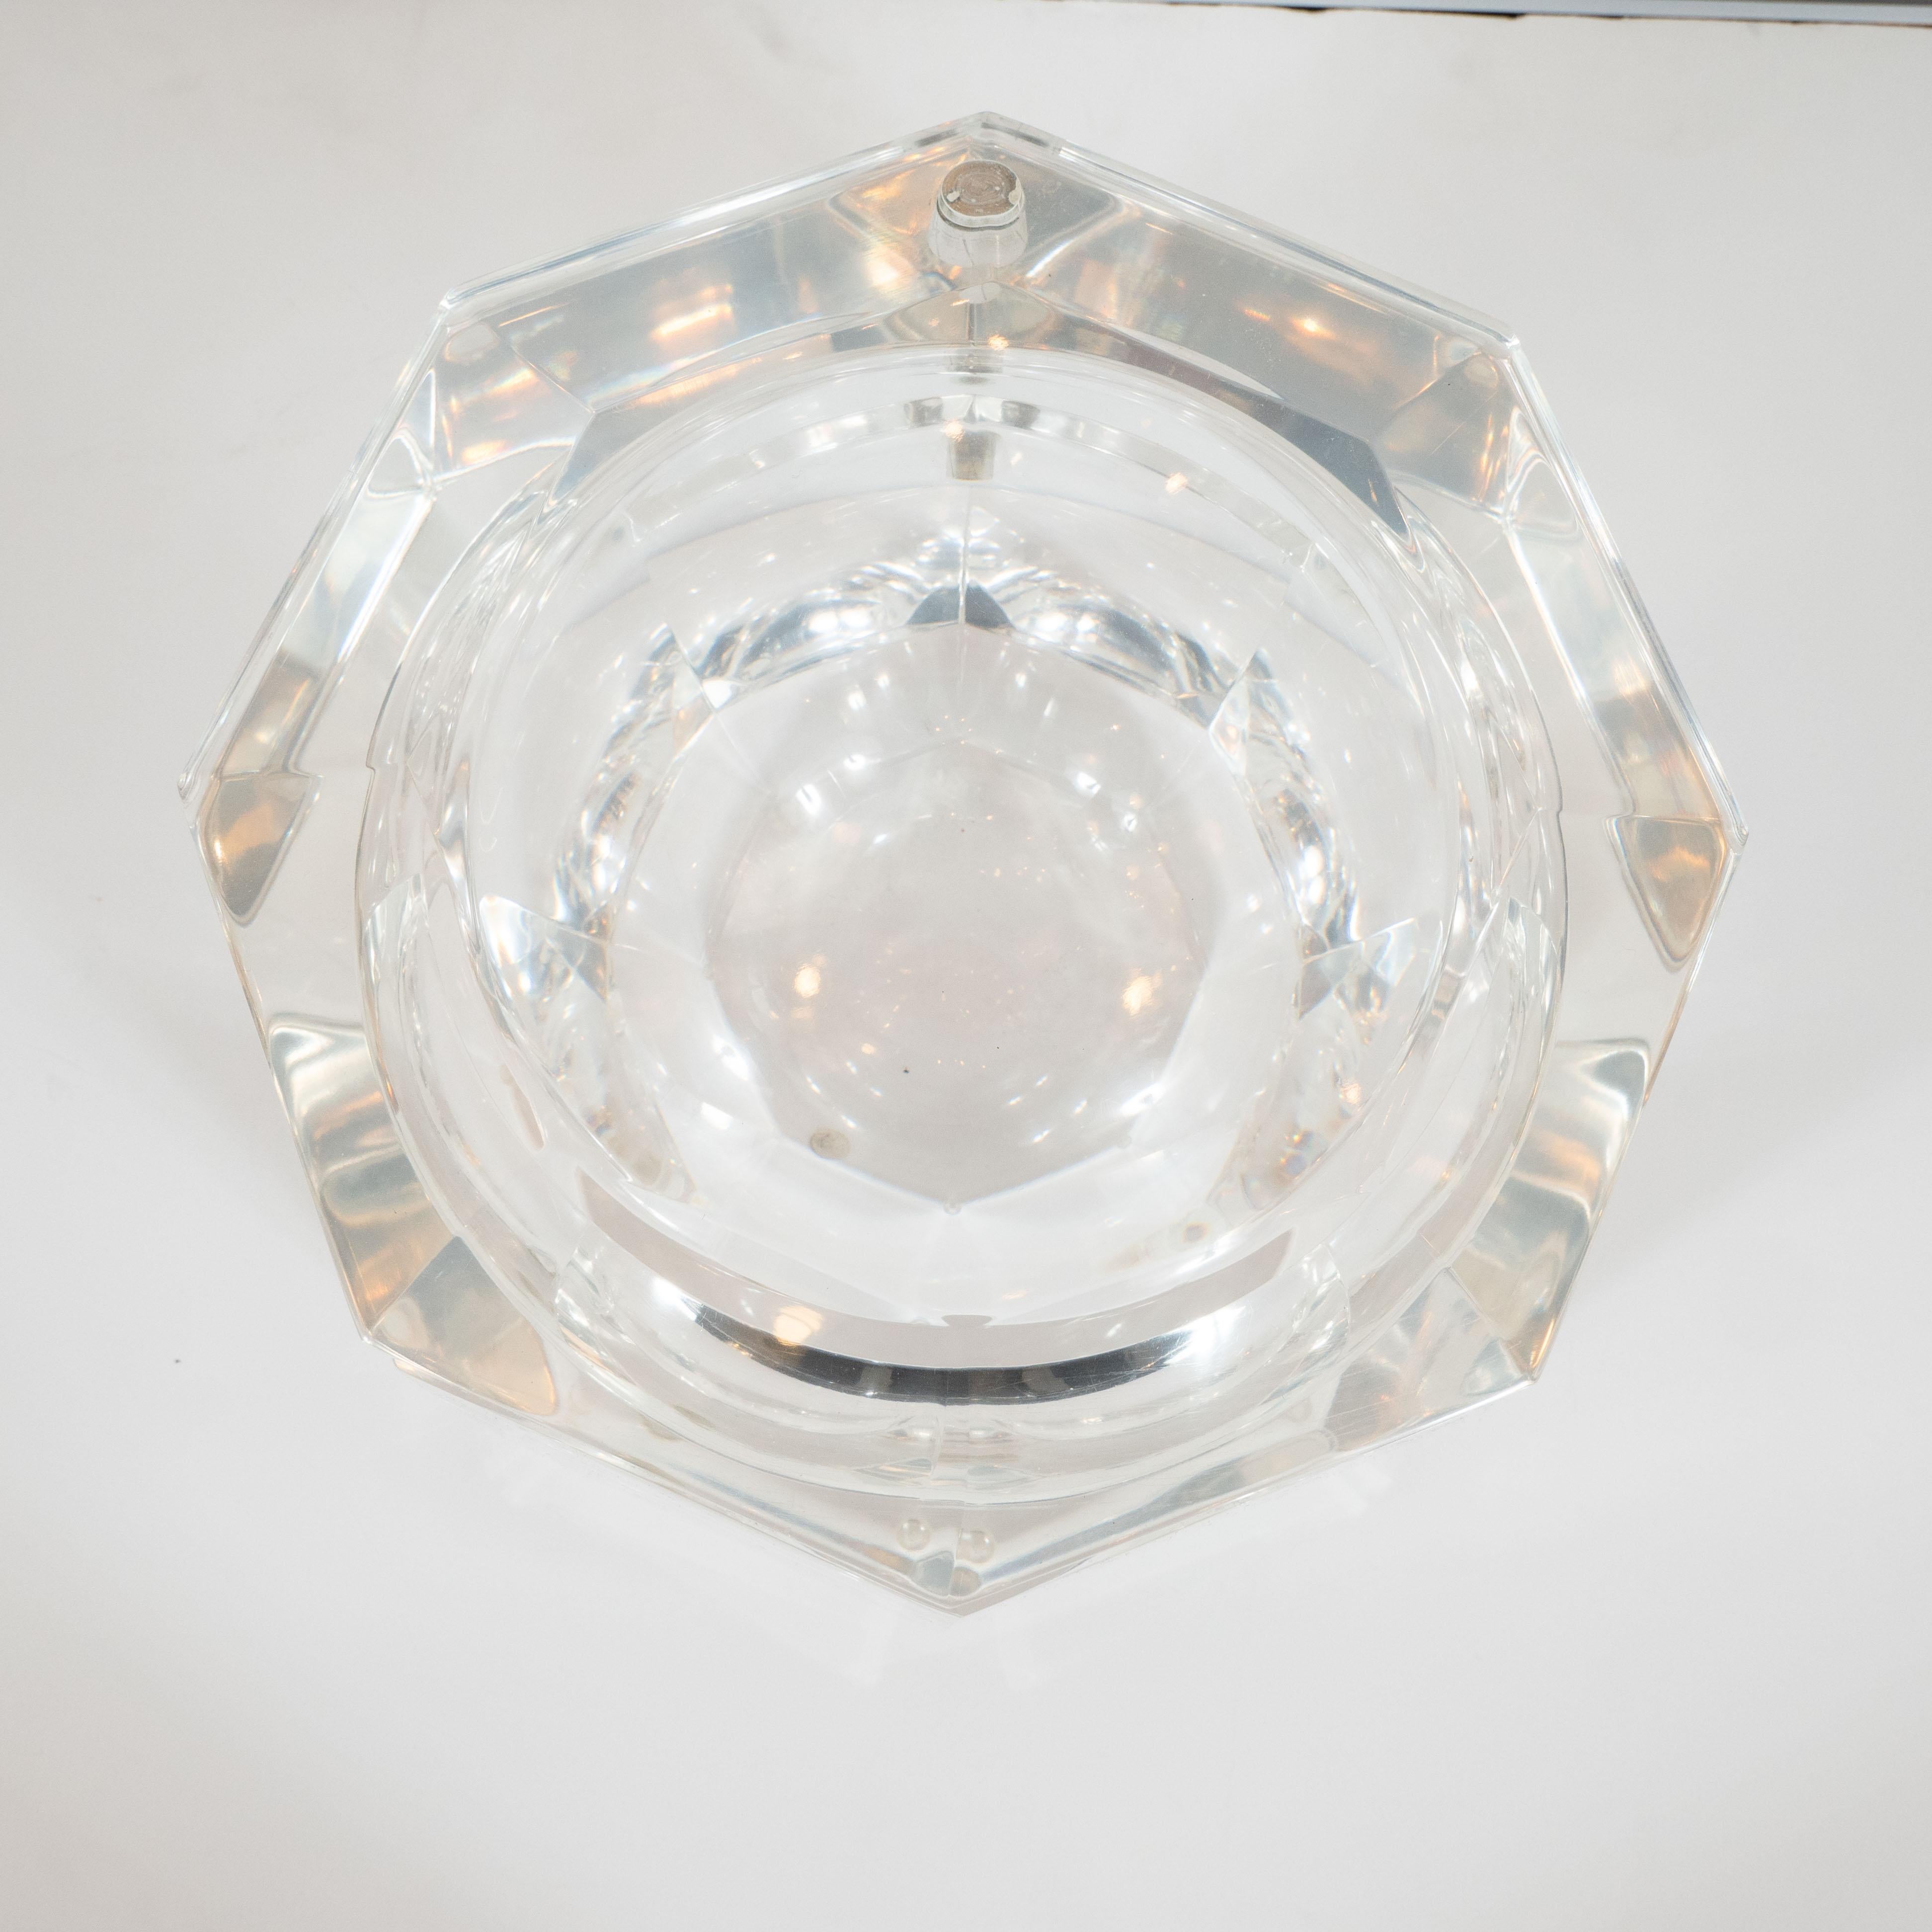 This elegant Mid-Century Modern octagonal ice bucket was realized in the United States by the esteemed designer Carol Stupell, circa 1970. It features a faceted body and top composed of faceted translucent Lucite, giving it the overall appearance of